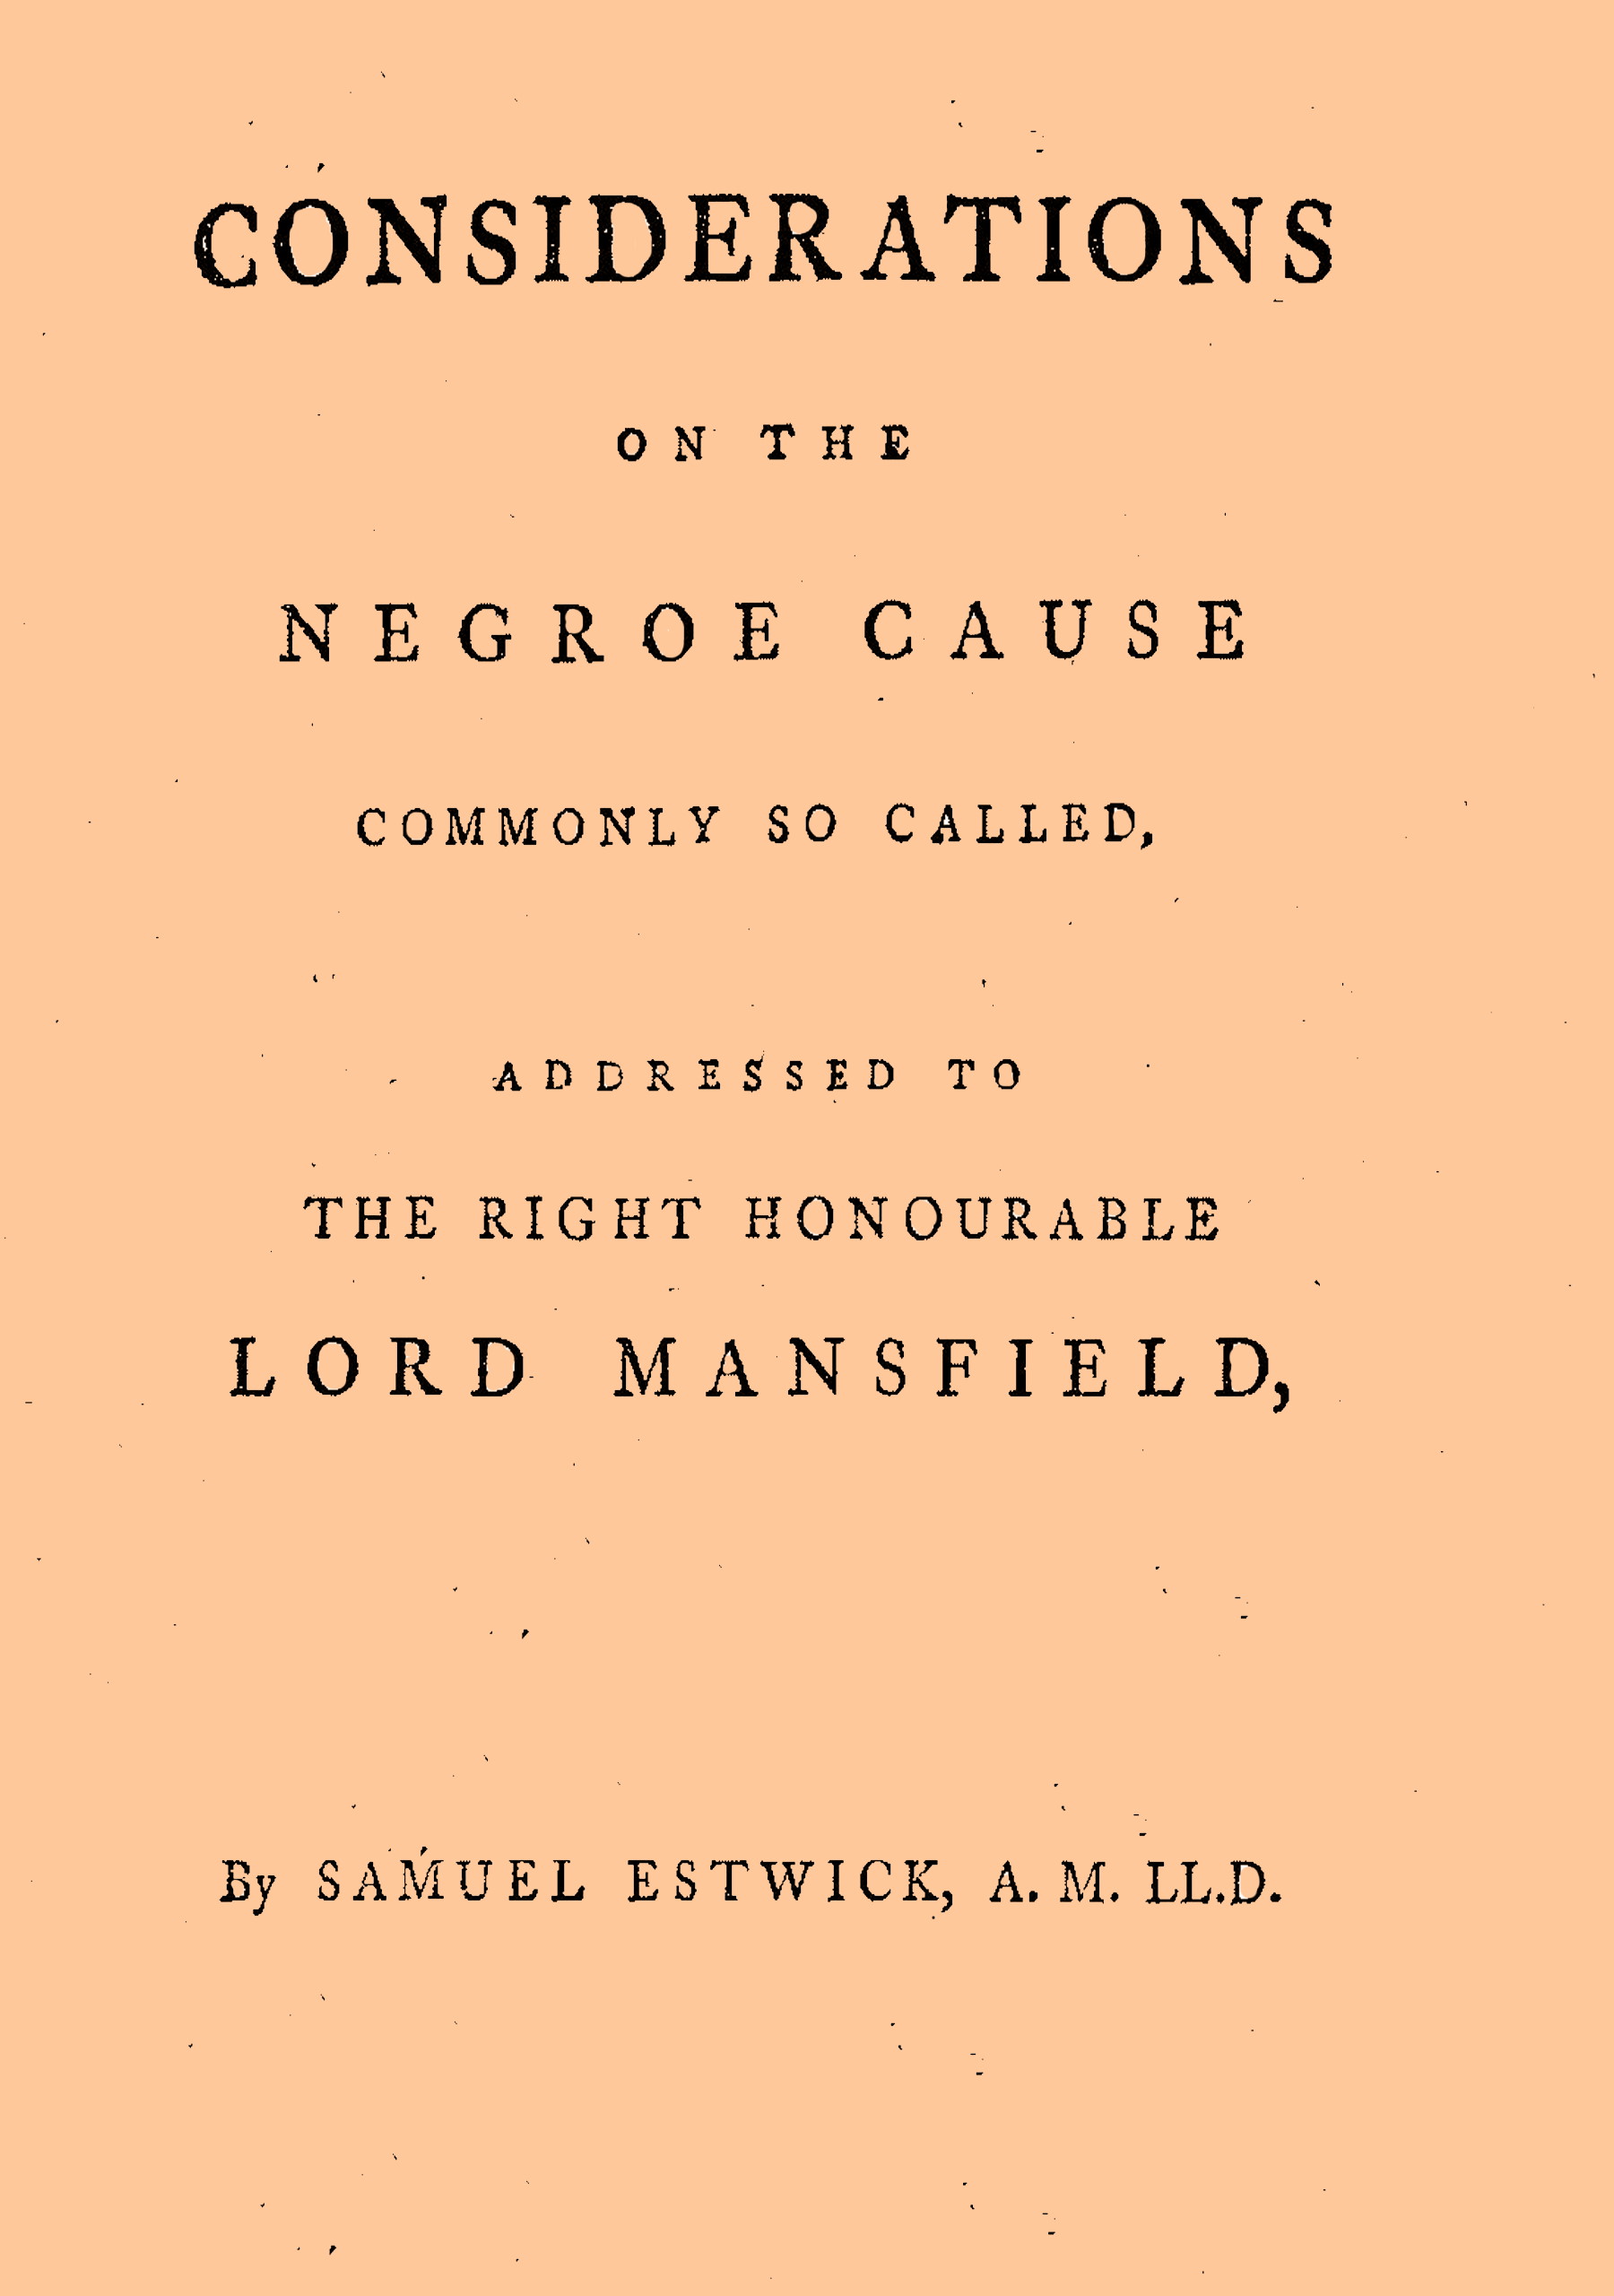 Considerations on the Negroe cause commonly so called&#10;Addressed to the Right Honourable Lord Mansfield, lord chief justice of the Court of King's Bench, &c.